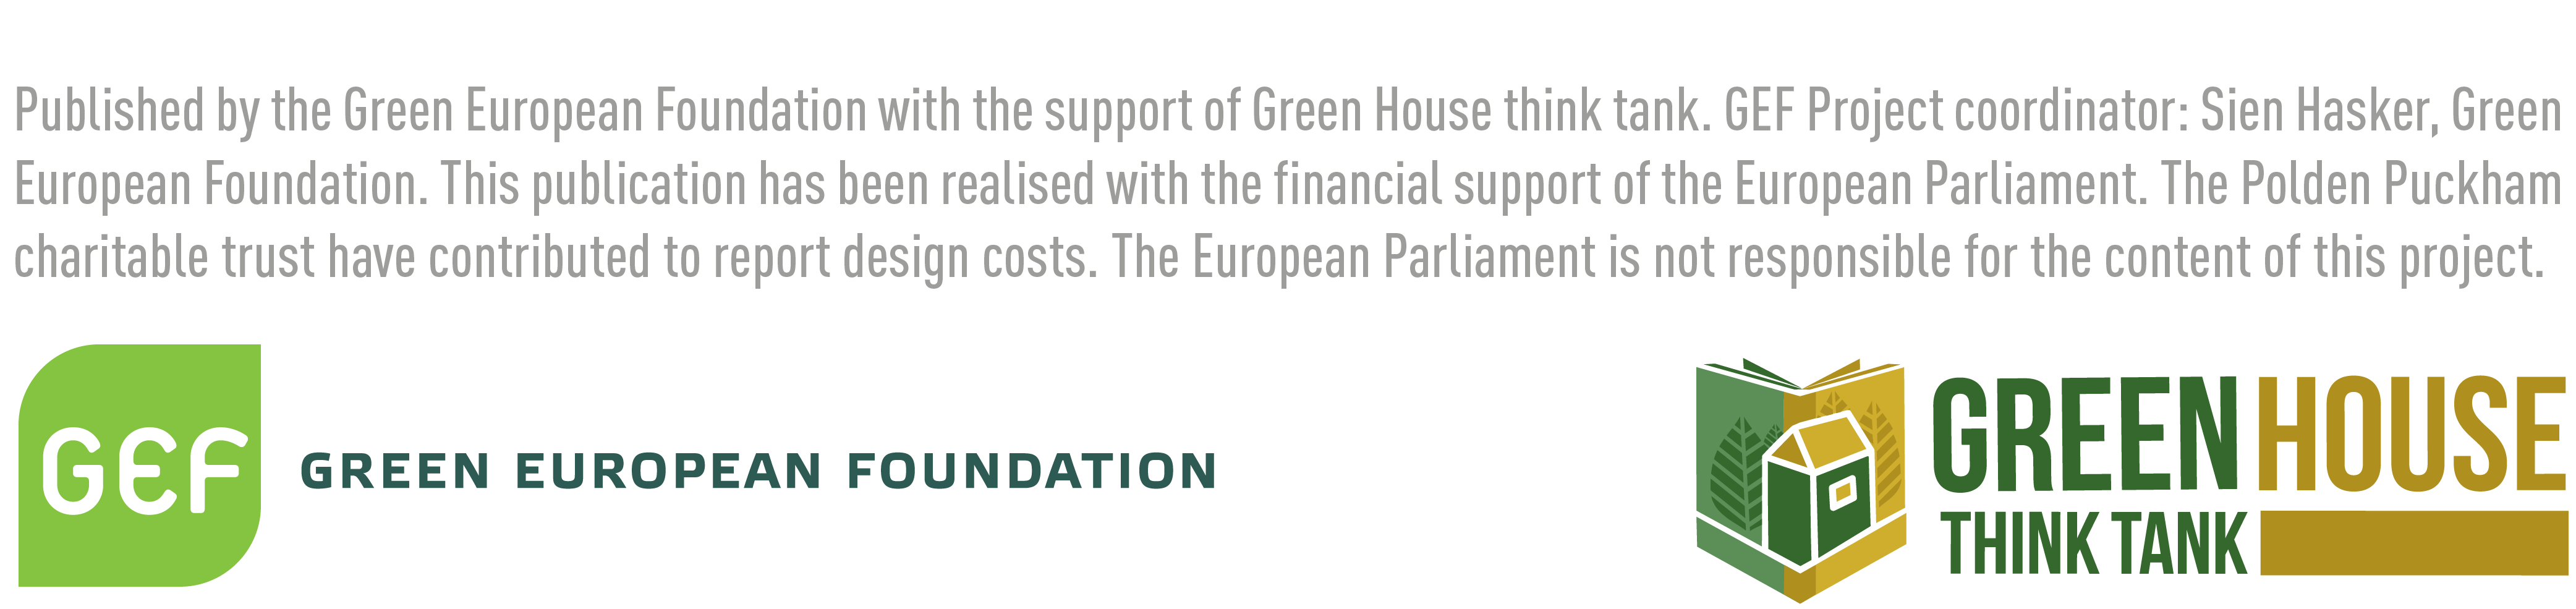 Image of the Logos of the Green European Foundation and Green House think tank with text that reads Published by the Green European Foundation with the support of Green House think tank. GEF project coordinator: Sian Hasker, Green European Foundation. This publication has been realised with financial support of the European parliament. The Polden Puckham charitable trust have contributed to the report design costs. The European Parliament is not responsible for the content of this project. 